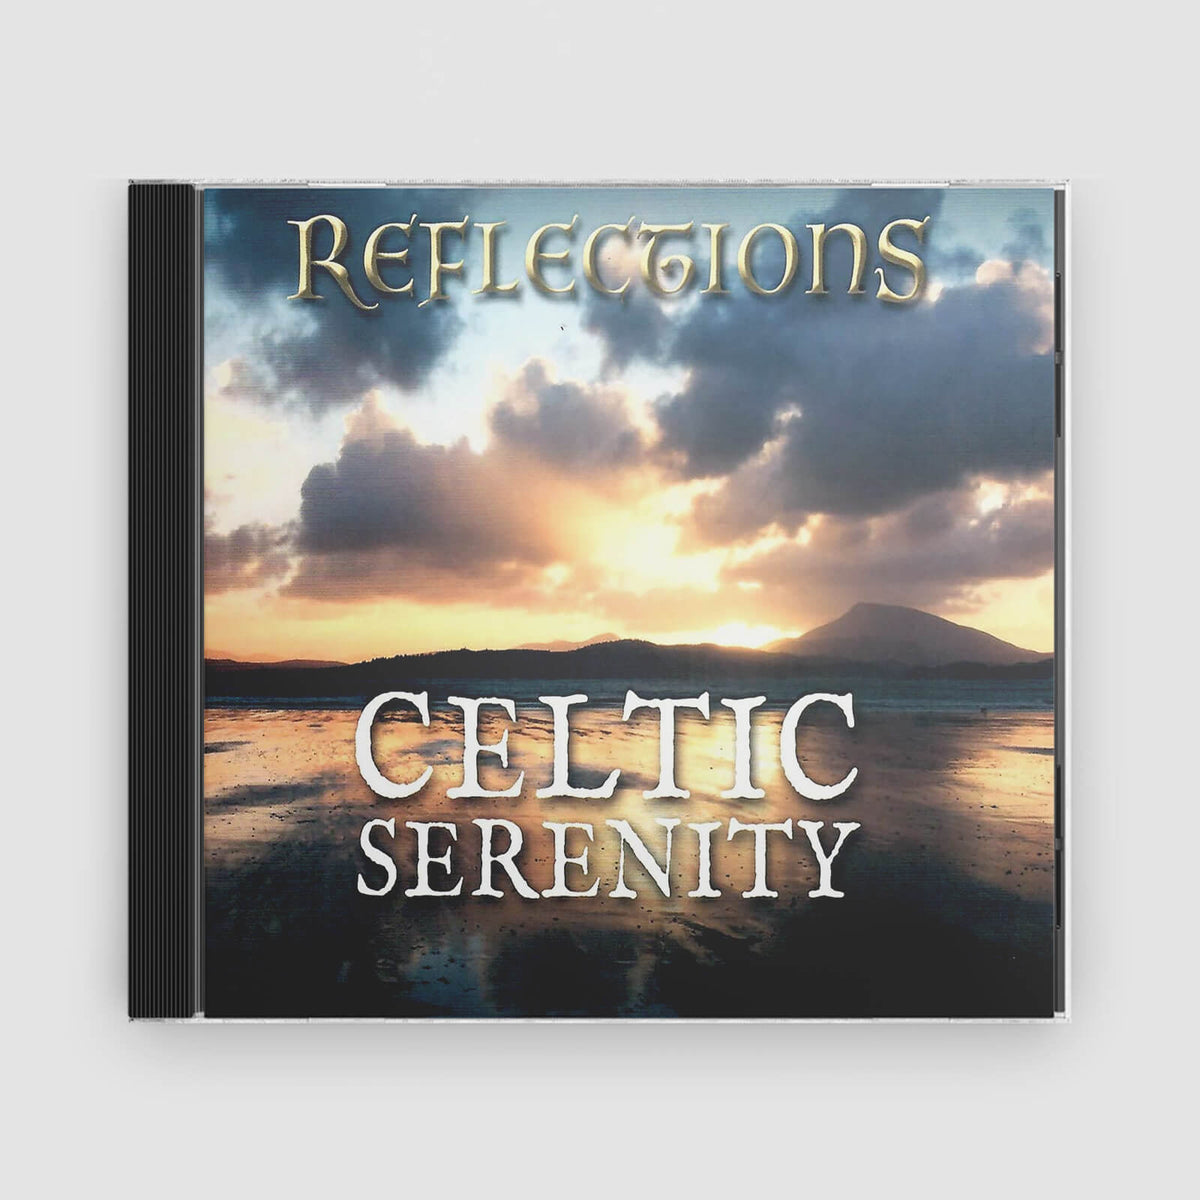 Celtic Serenity : Reflections